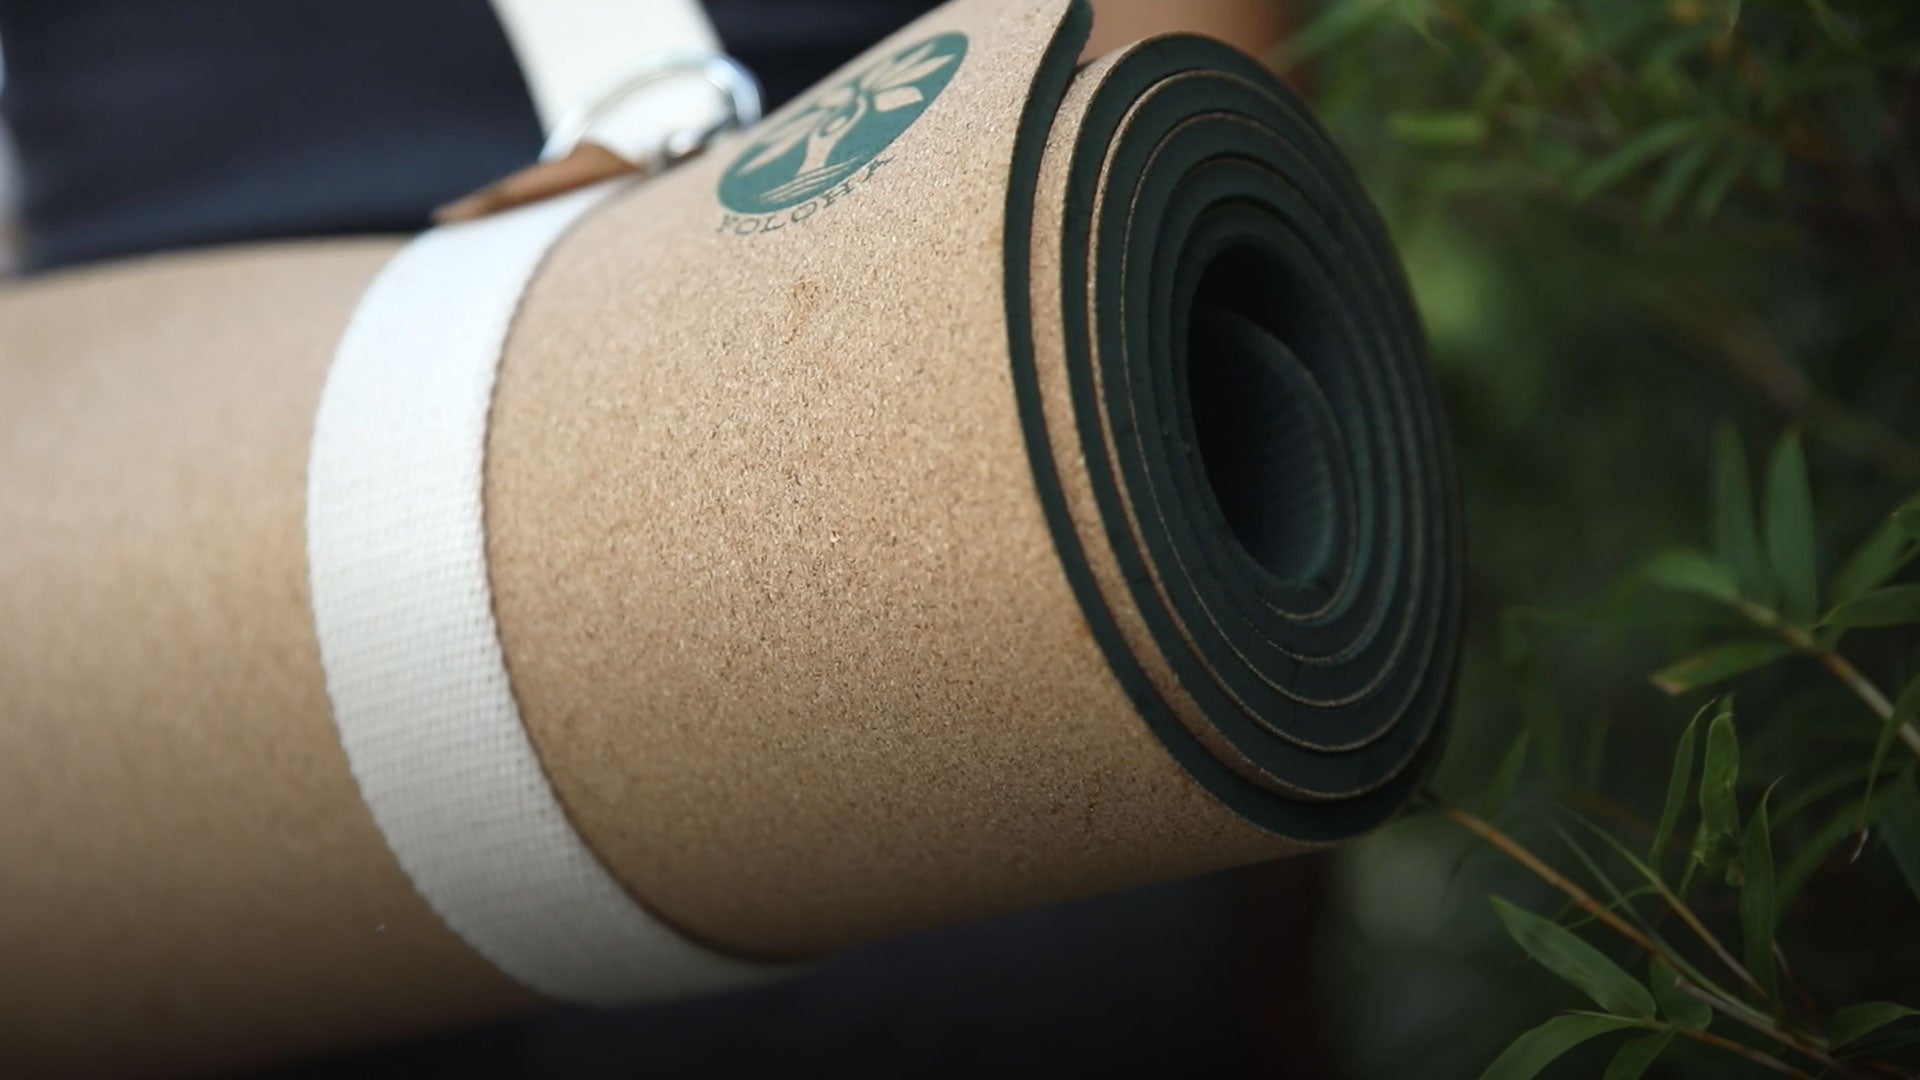 Sale ✨ Save up to 20% on the Unity Cork Yoga Mat With our unique blend of  cork and recycled rubber, the Unity elevates your practice w